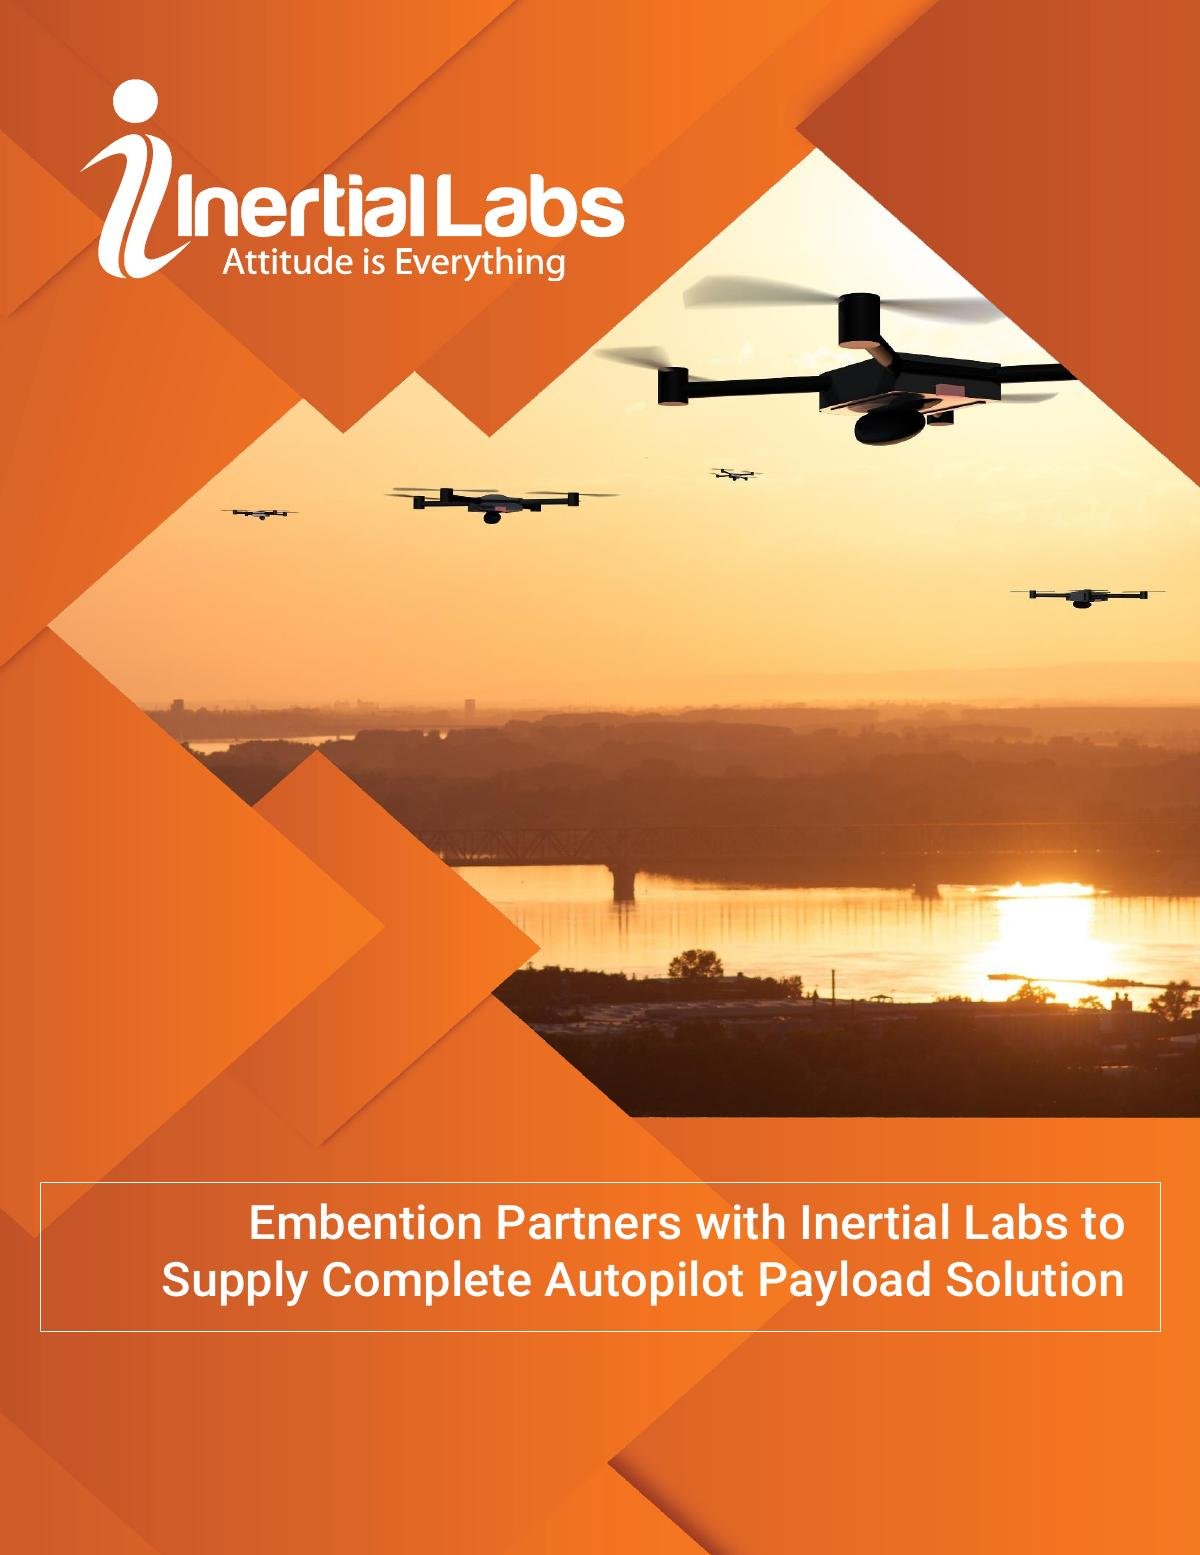 Embention Partners with Inertial Labs to Supply Complete Autopilot Payload Solution